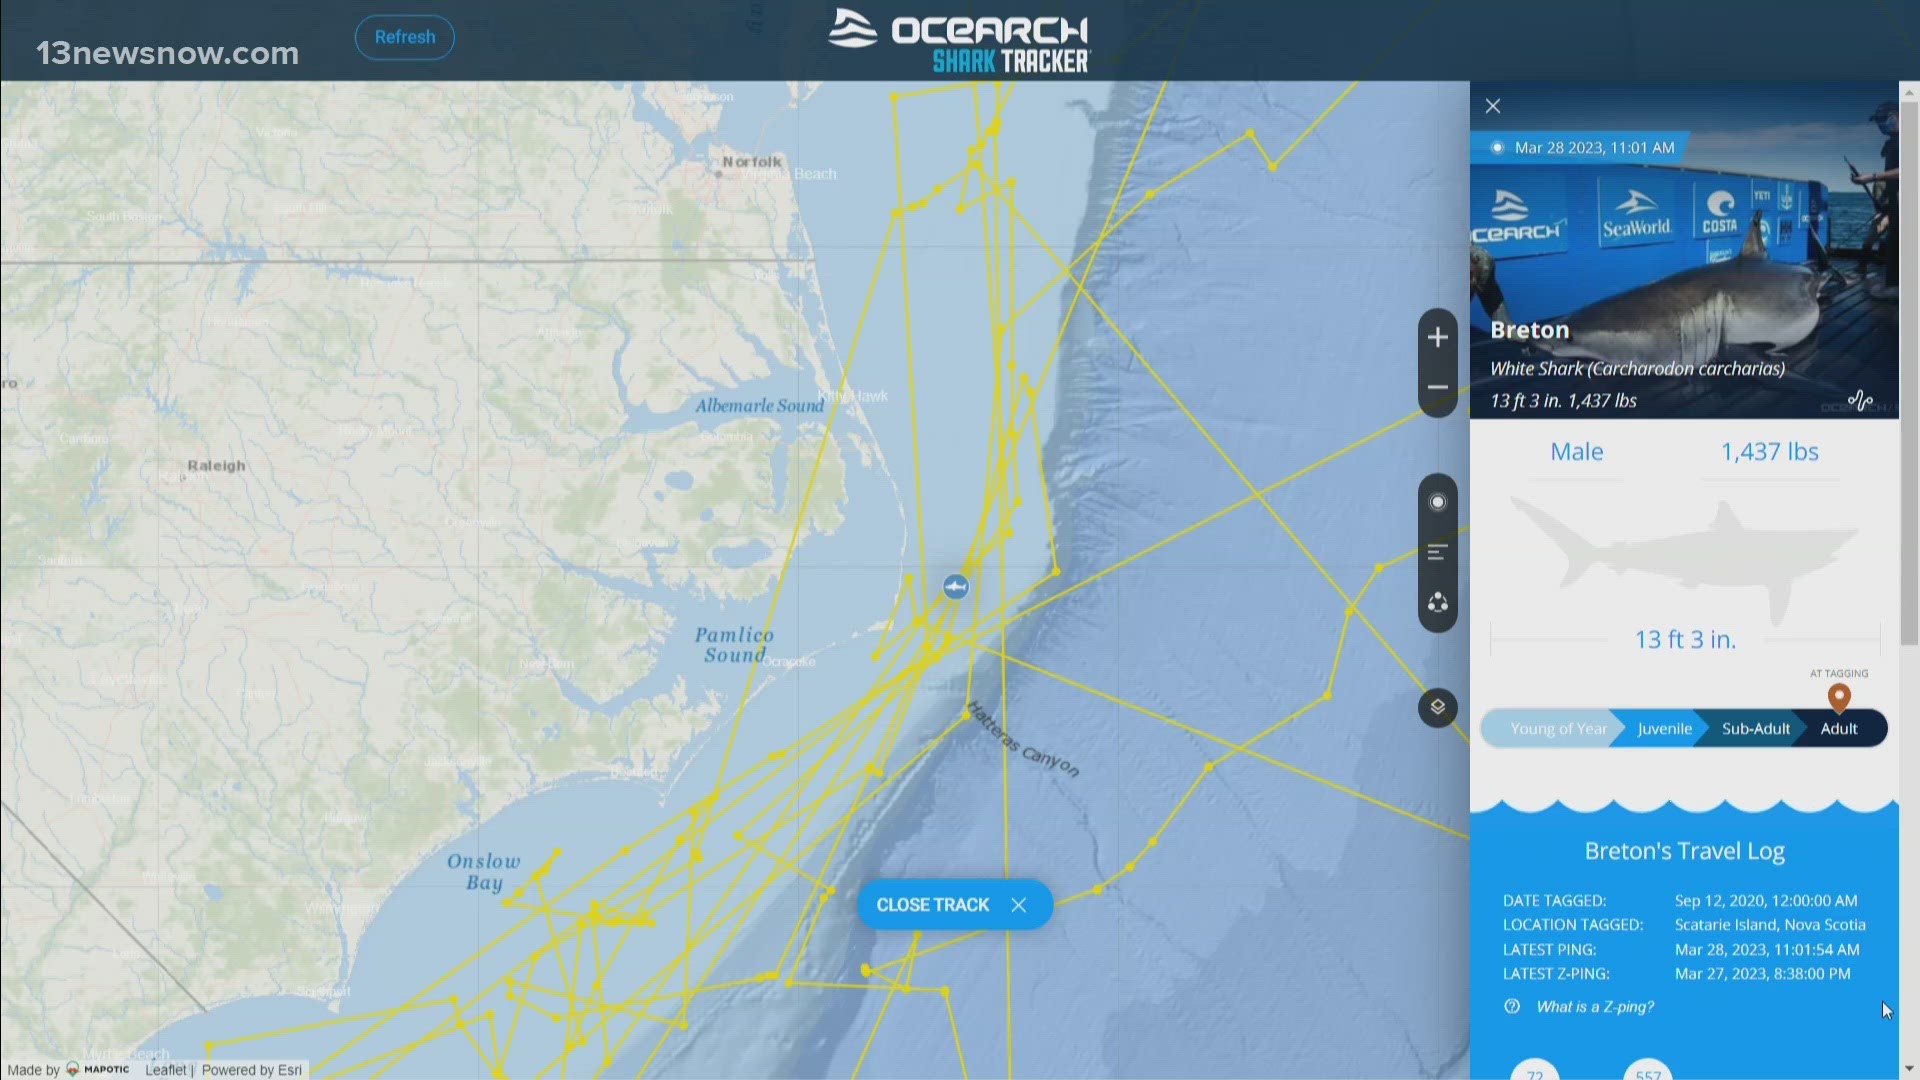 His name is Breton, a great white shark tracked by scientists at OCEARCH. He last pinged off the coast of Avon on March 28.